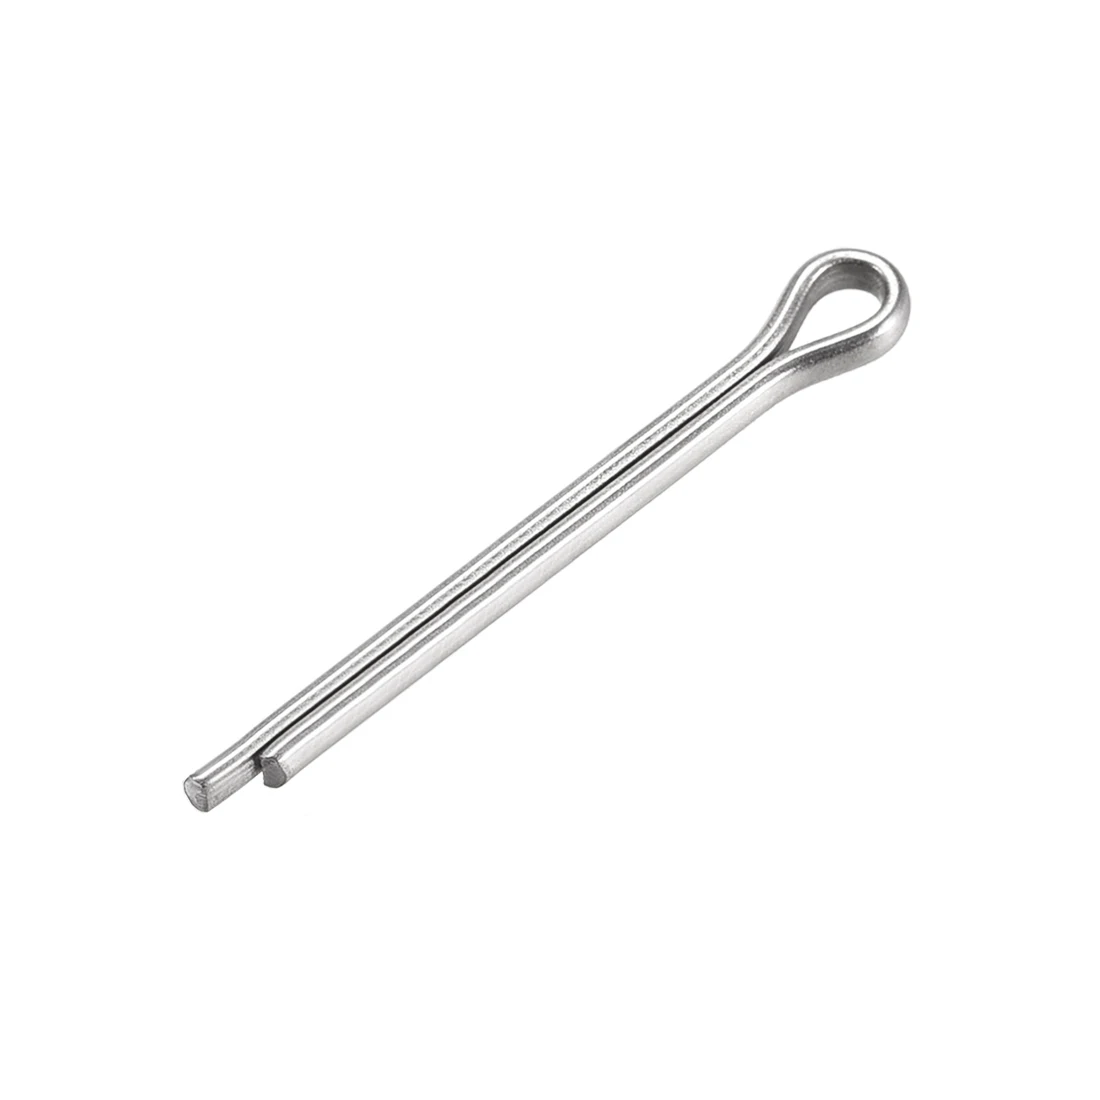 

uxcell 60Pcs Split Cotter Pin - 2.3mm x 25mm 304 Stainless Steel 2-Prongs Silver Tone for Secure Clevis Pins,Castle Nuts